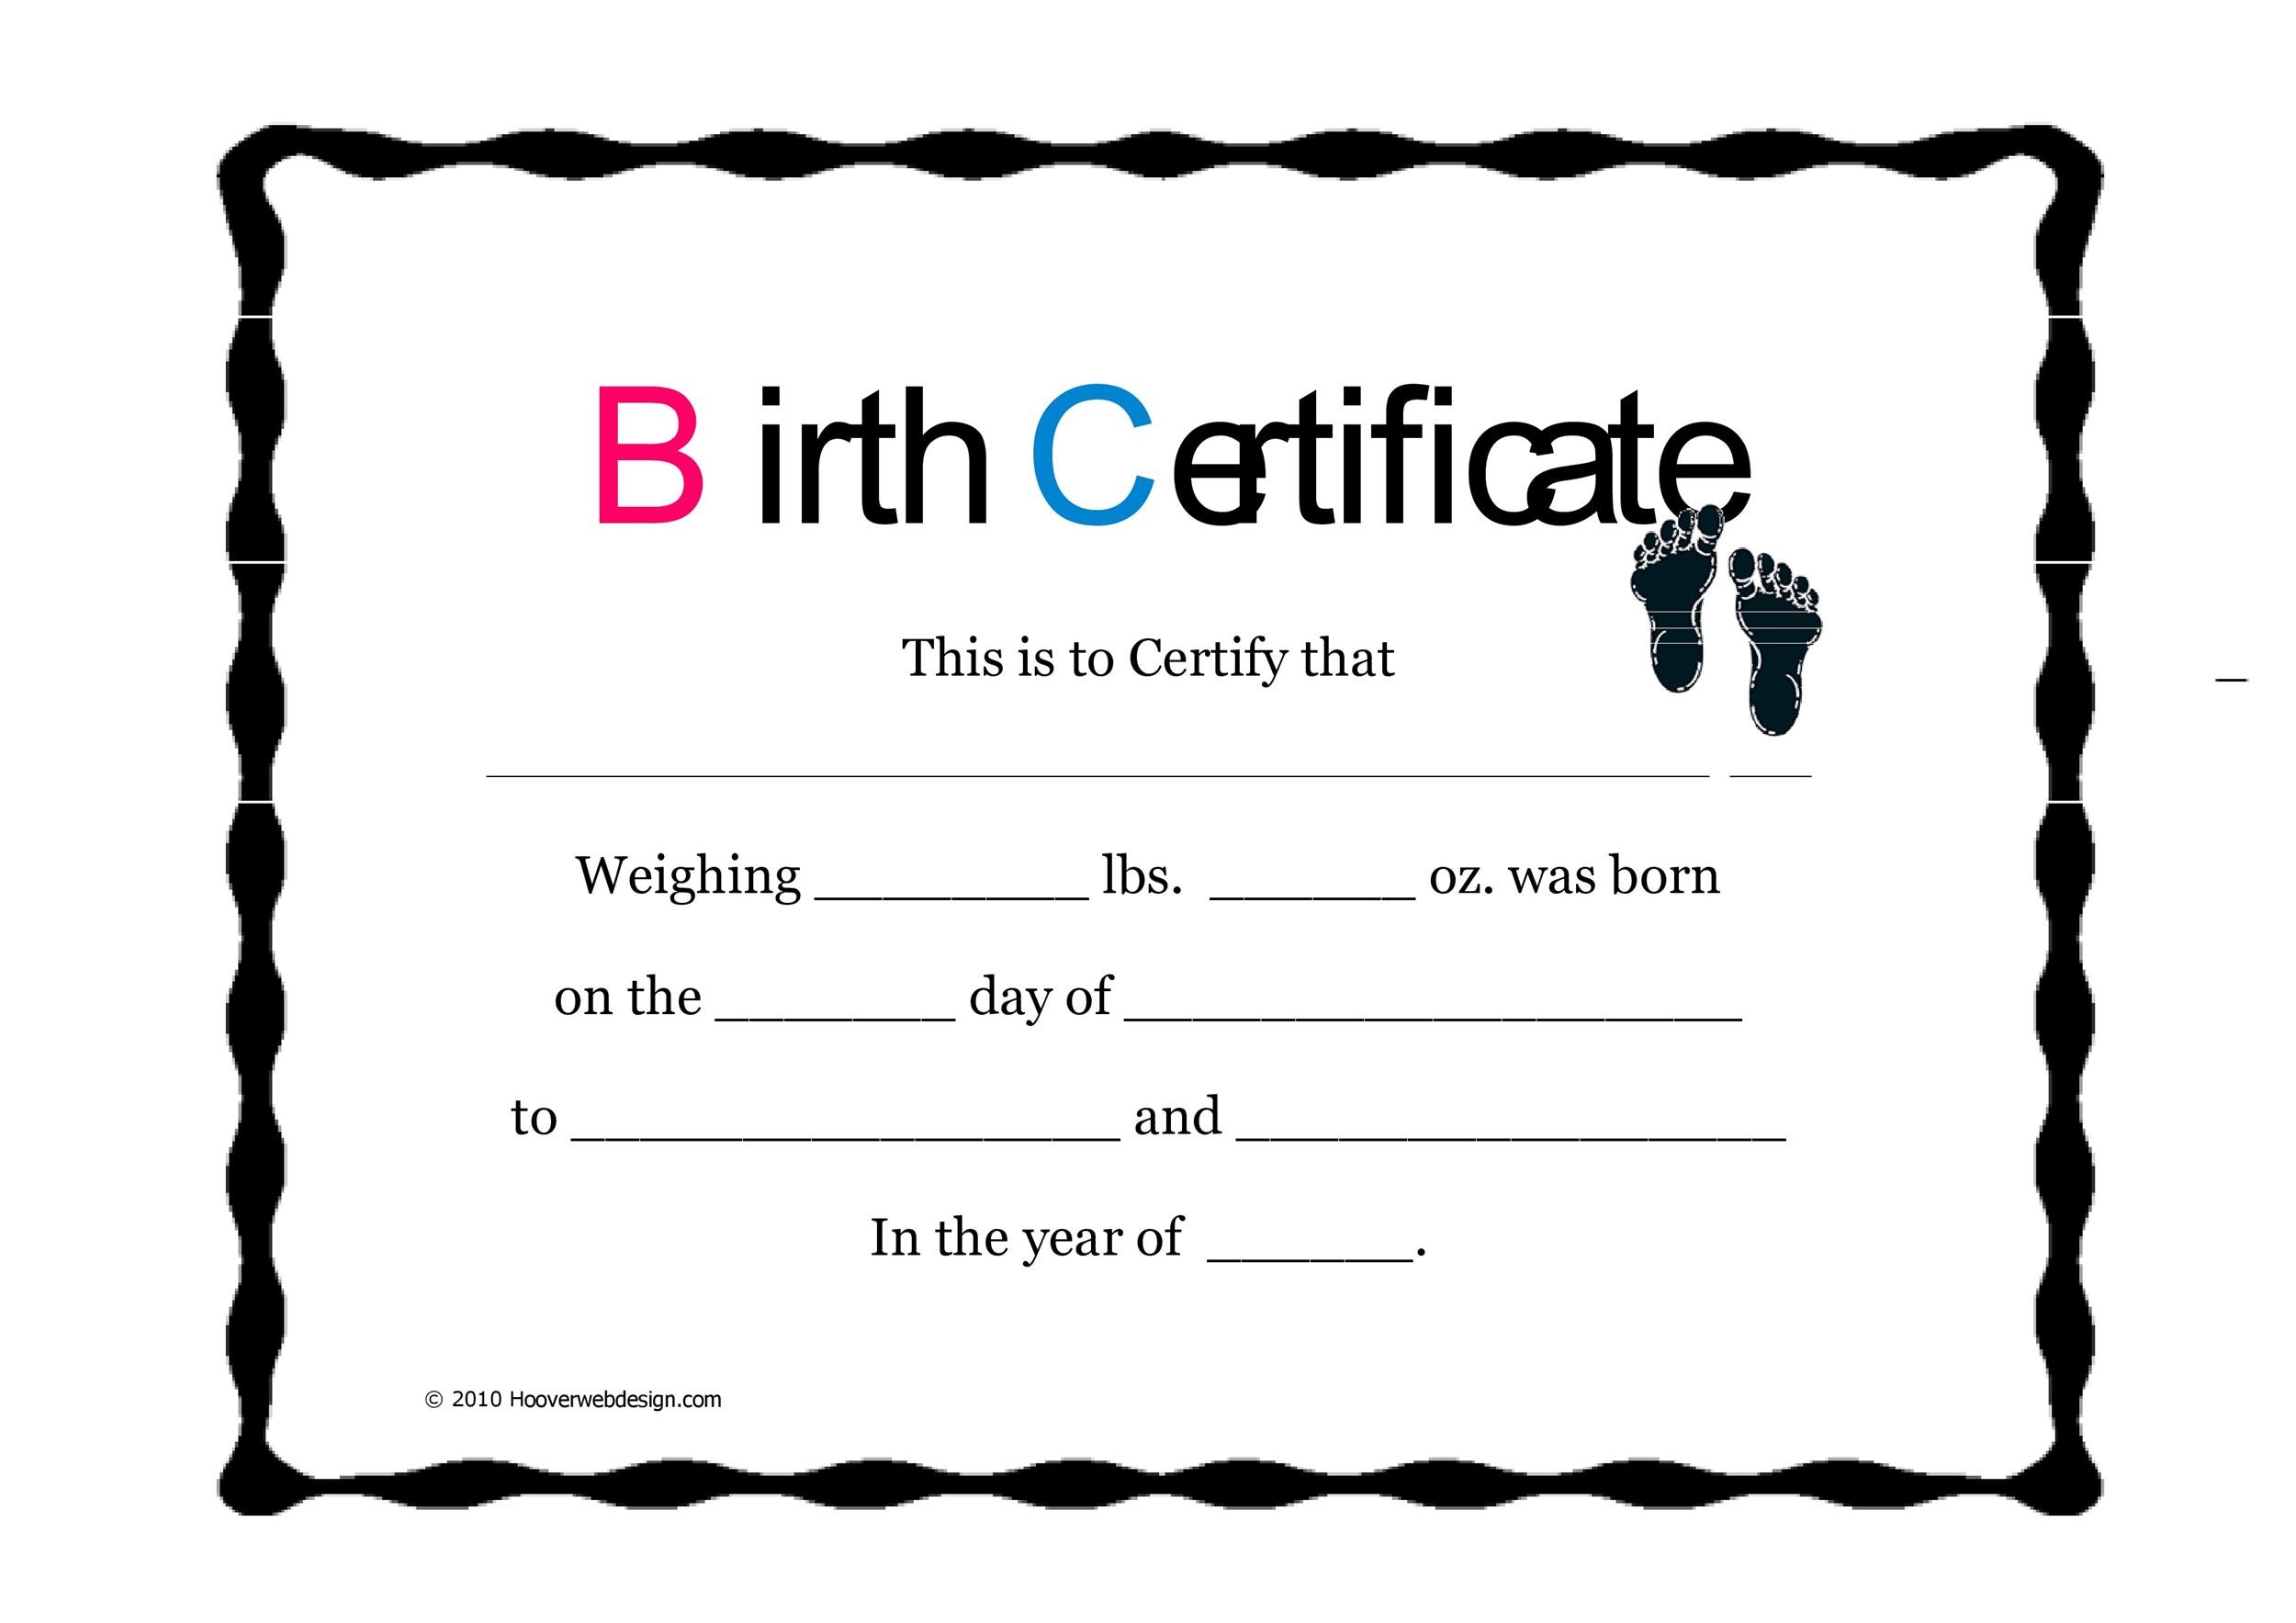 how to get your birth certificate online